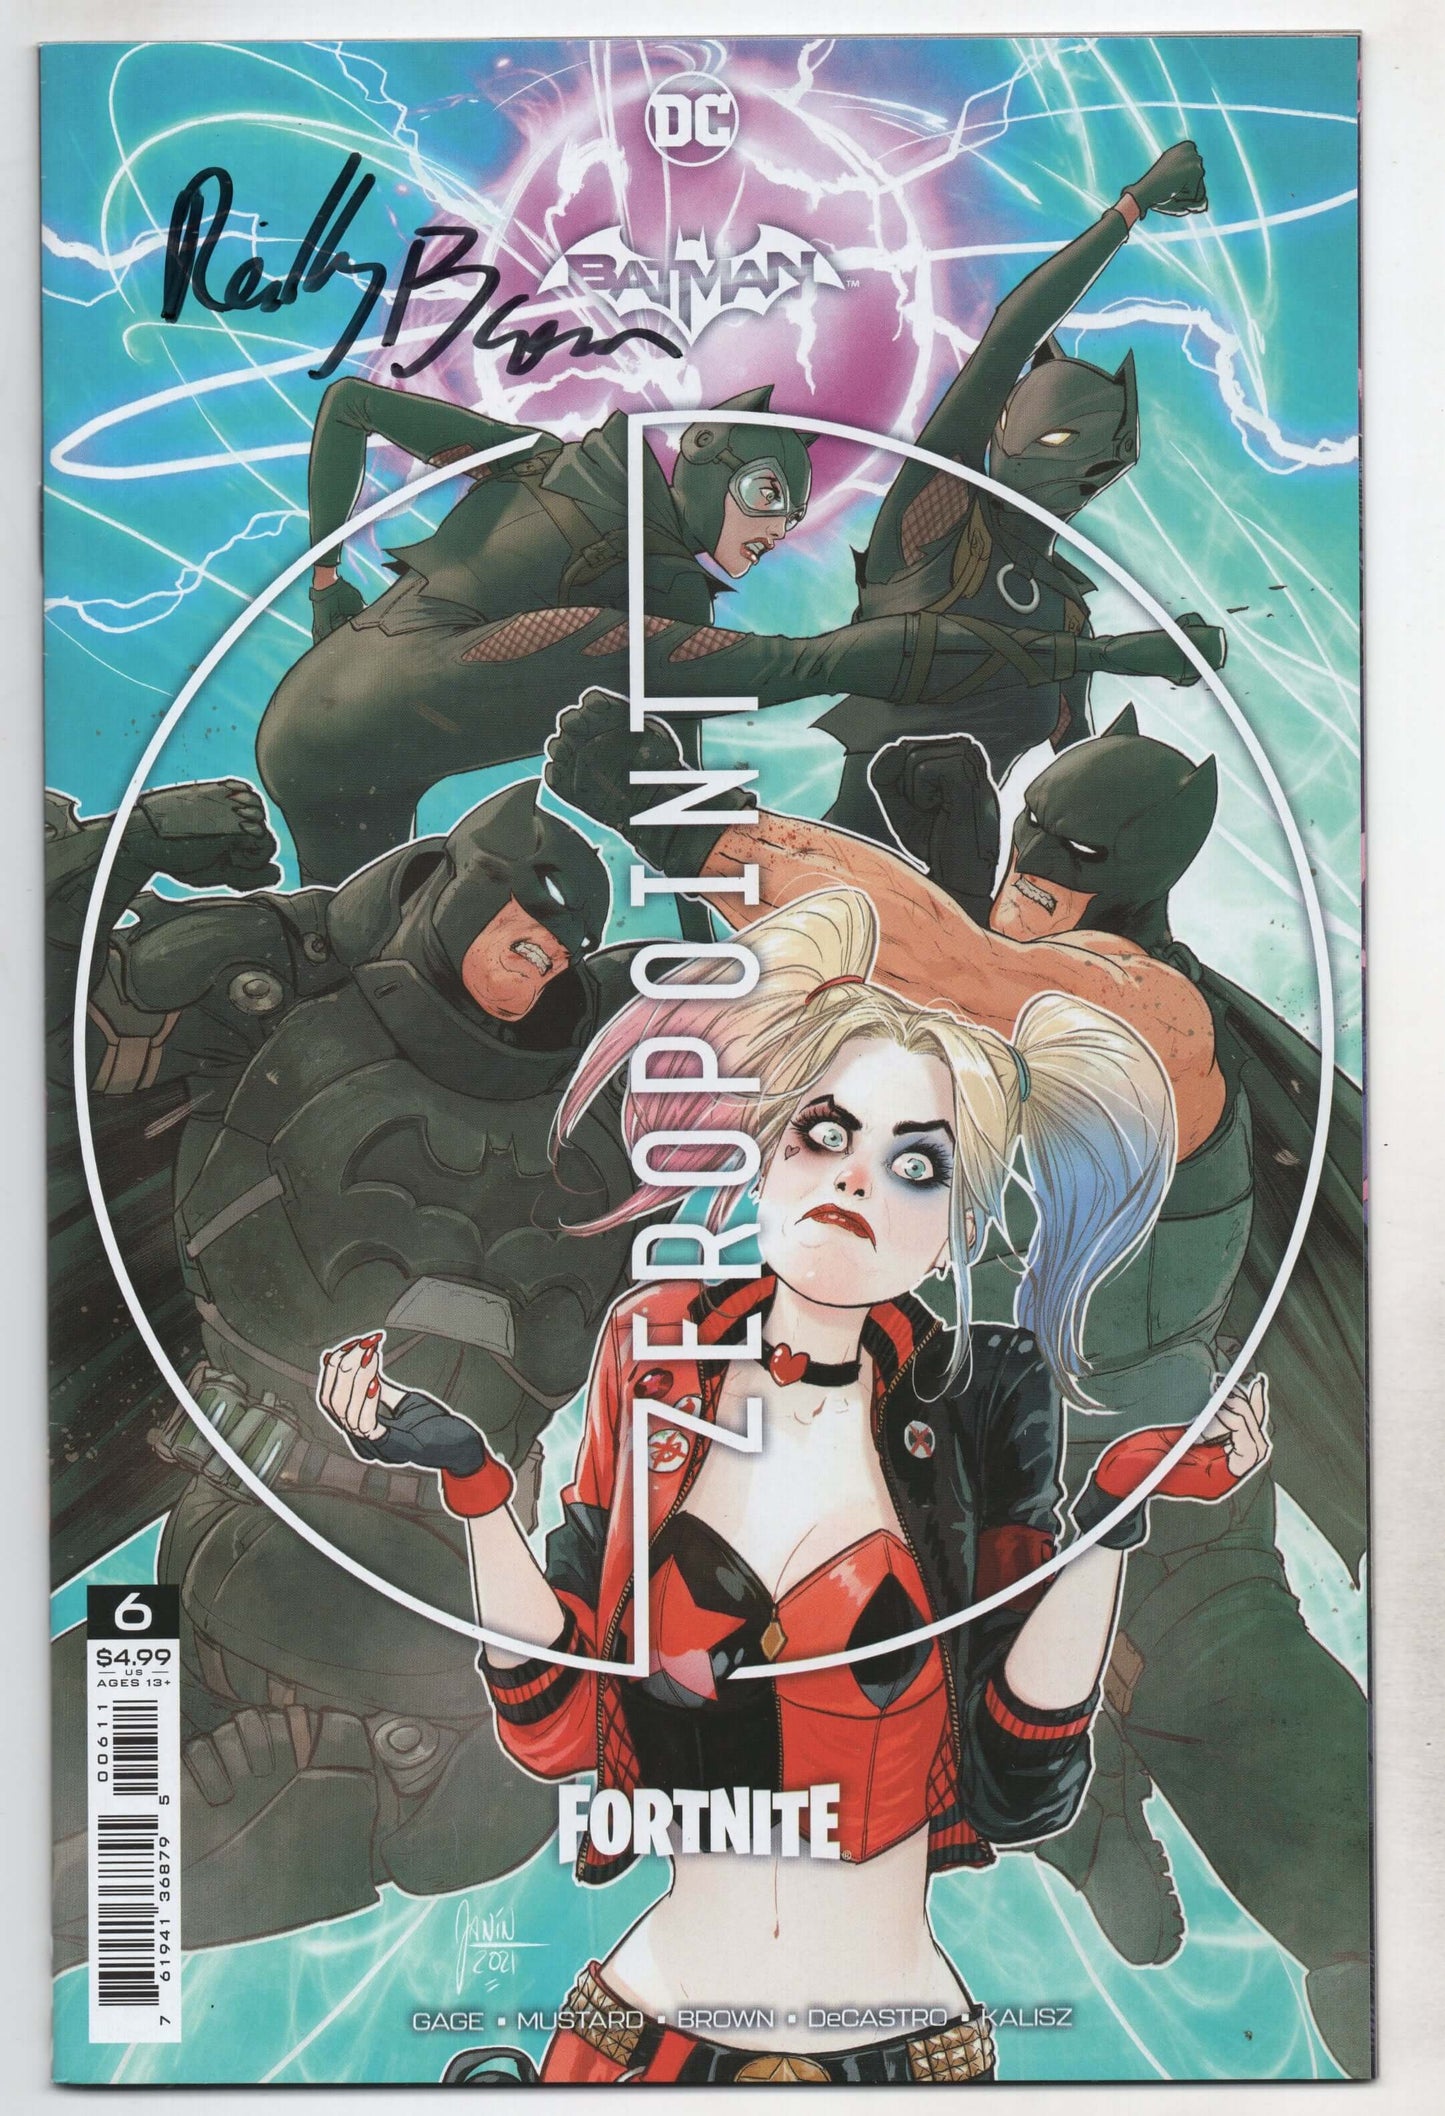 Batman Fortnite Zero Point #6 A Mikel Janin SIGNED Reilly Brown (07/06/2021) Dc